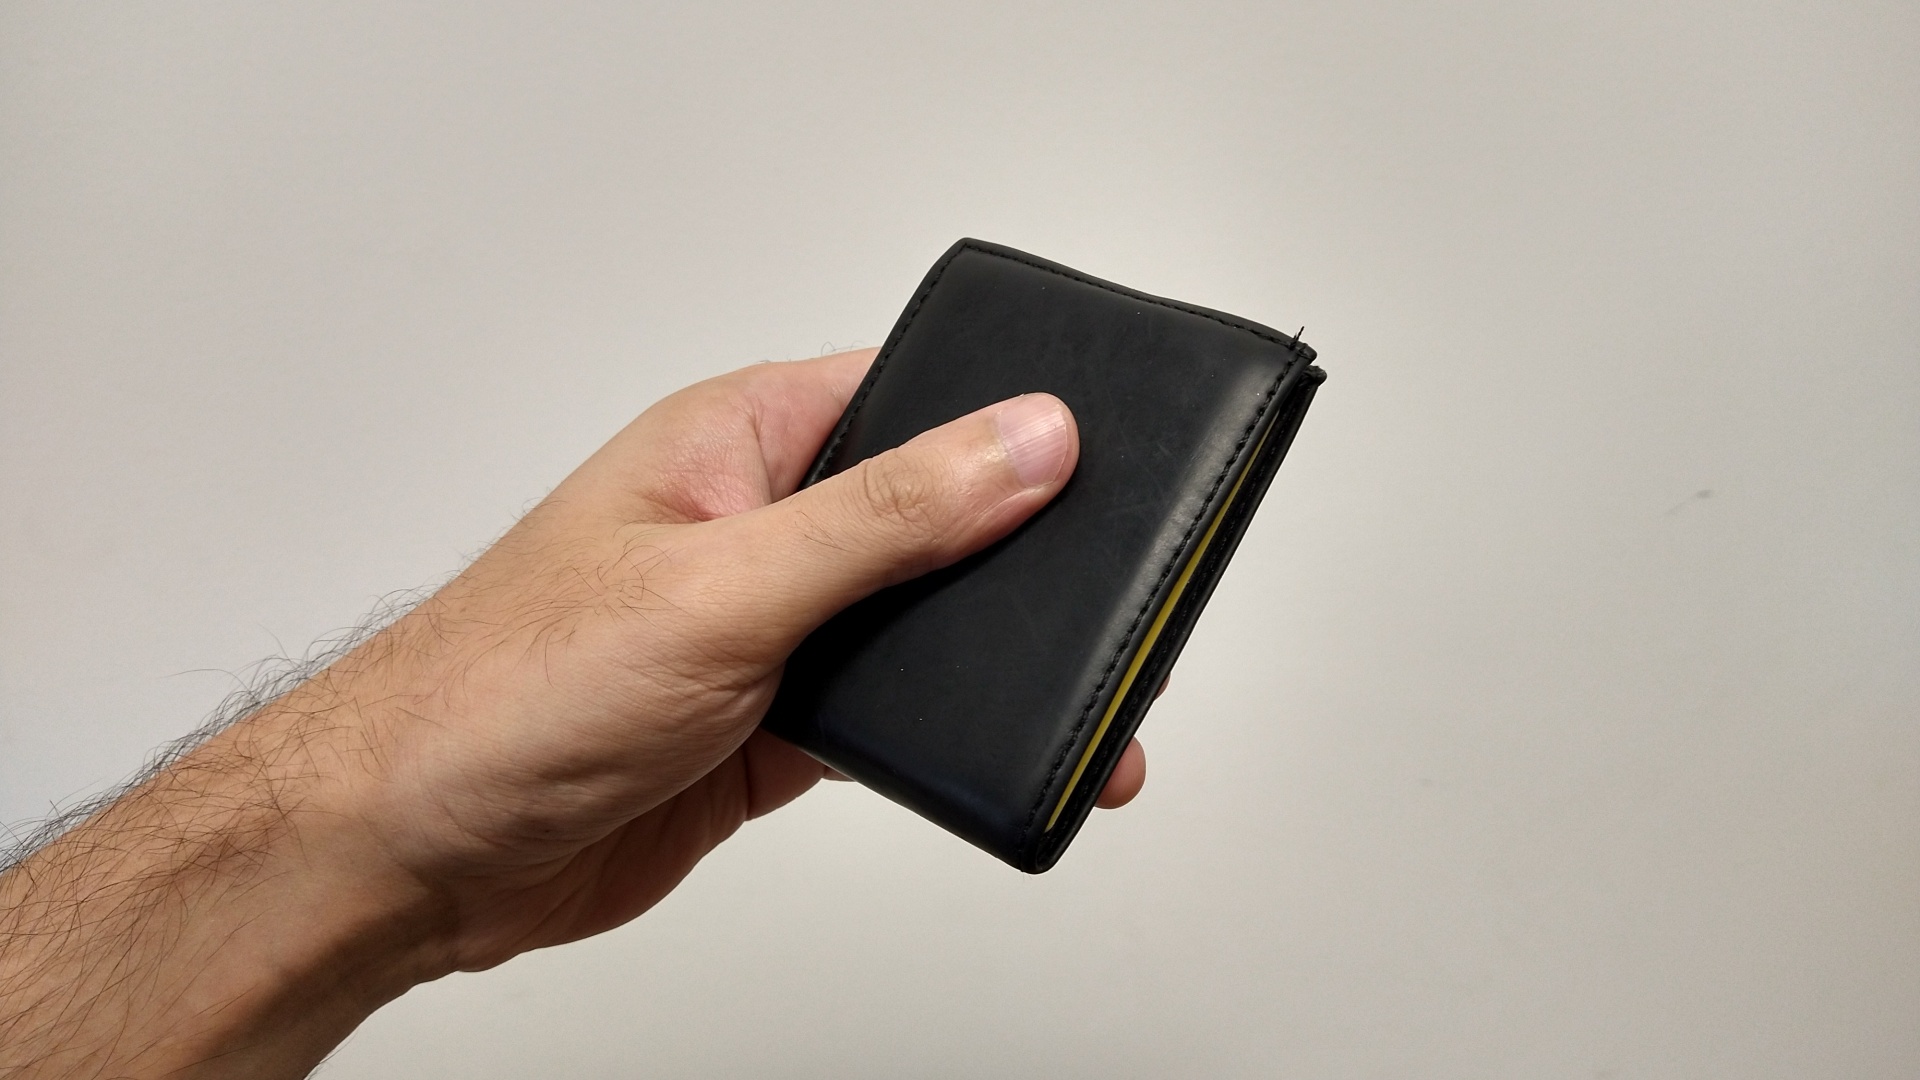 Photo of a wallet